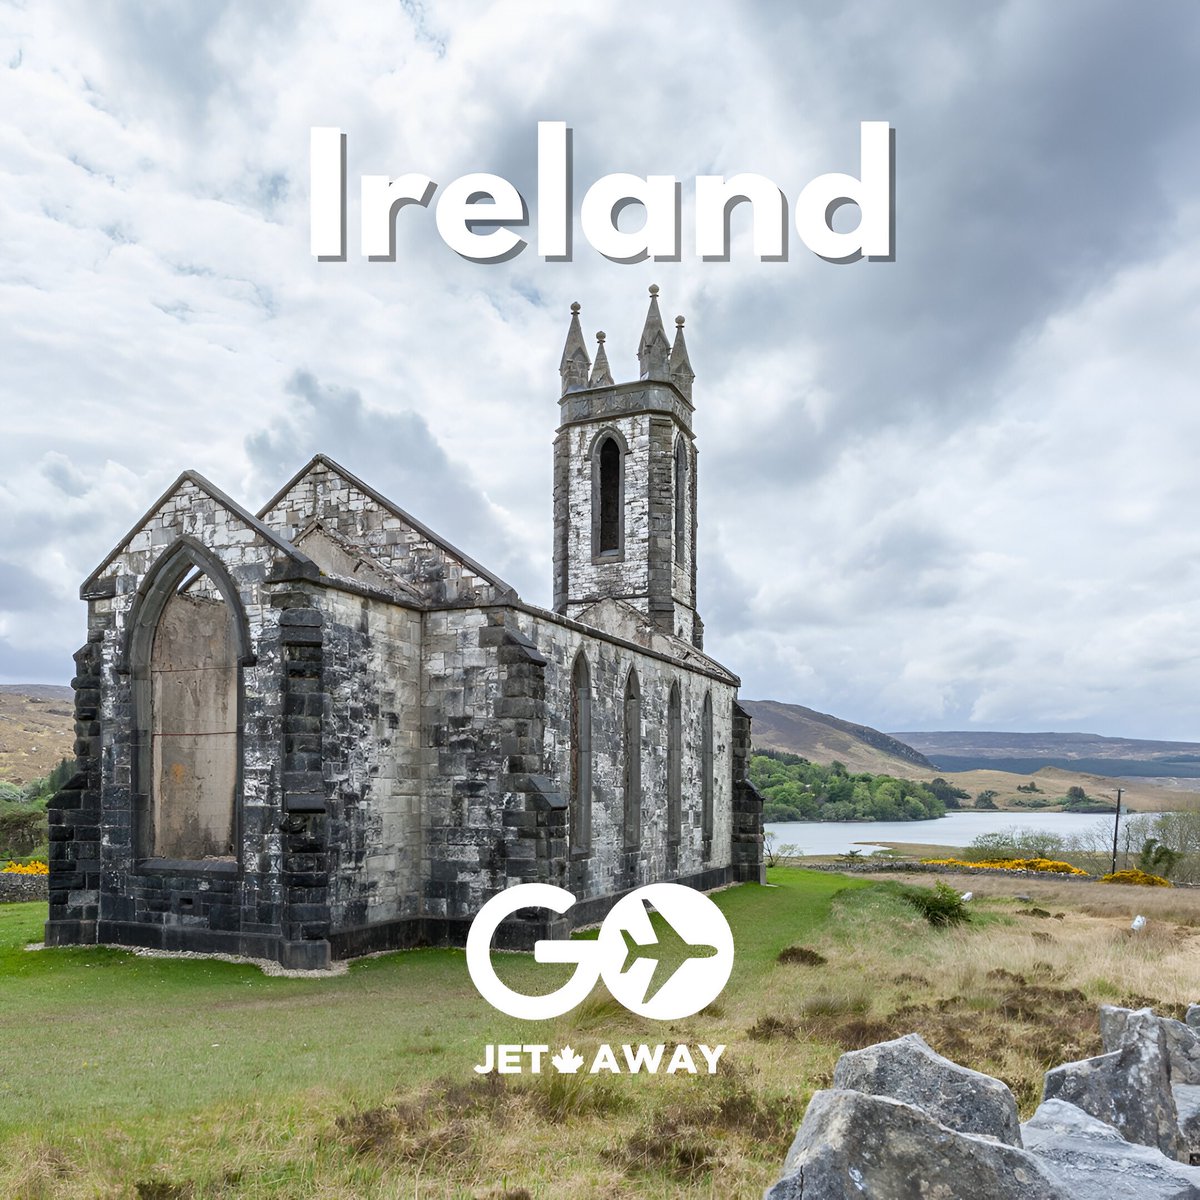 When  we plan your trip to Ireland you’ll want to step back in time and visit  the enchanting Dunlewey Church in County Donegal. Built in 1853, this  picturesque church boasts breathtaking views of Dunlewey Lough lade. #TravelIreland #HistoricSites #IrishHeritage